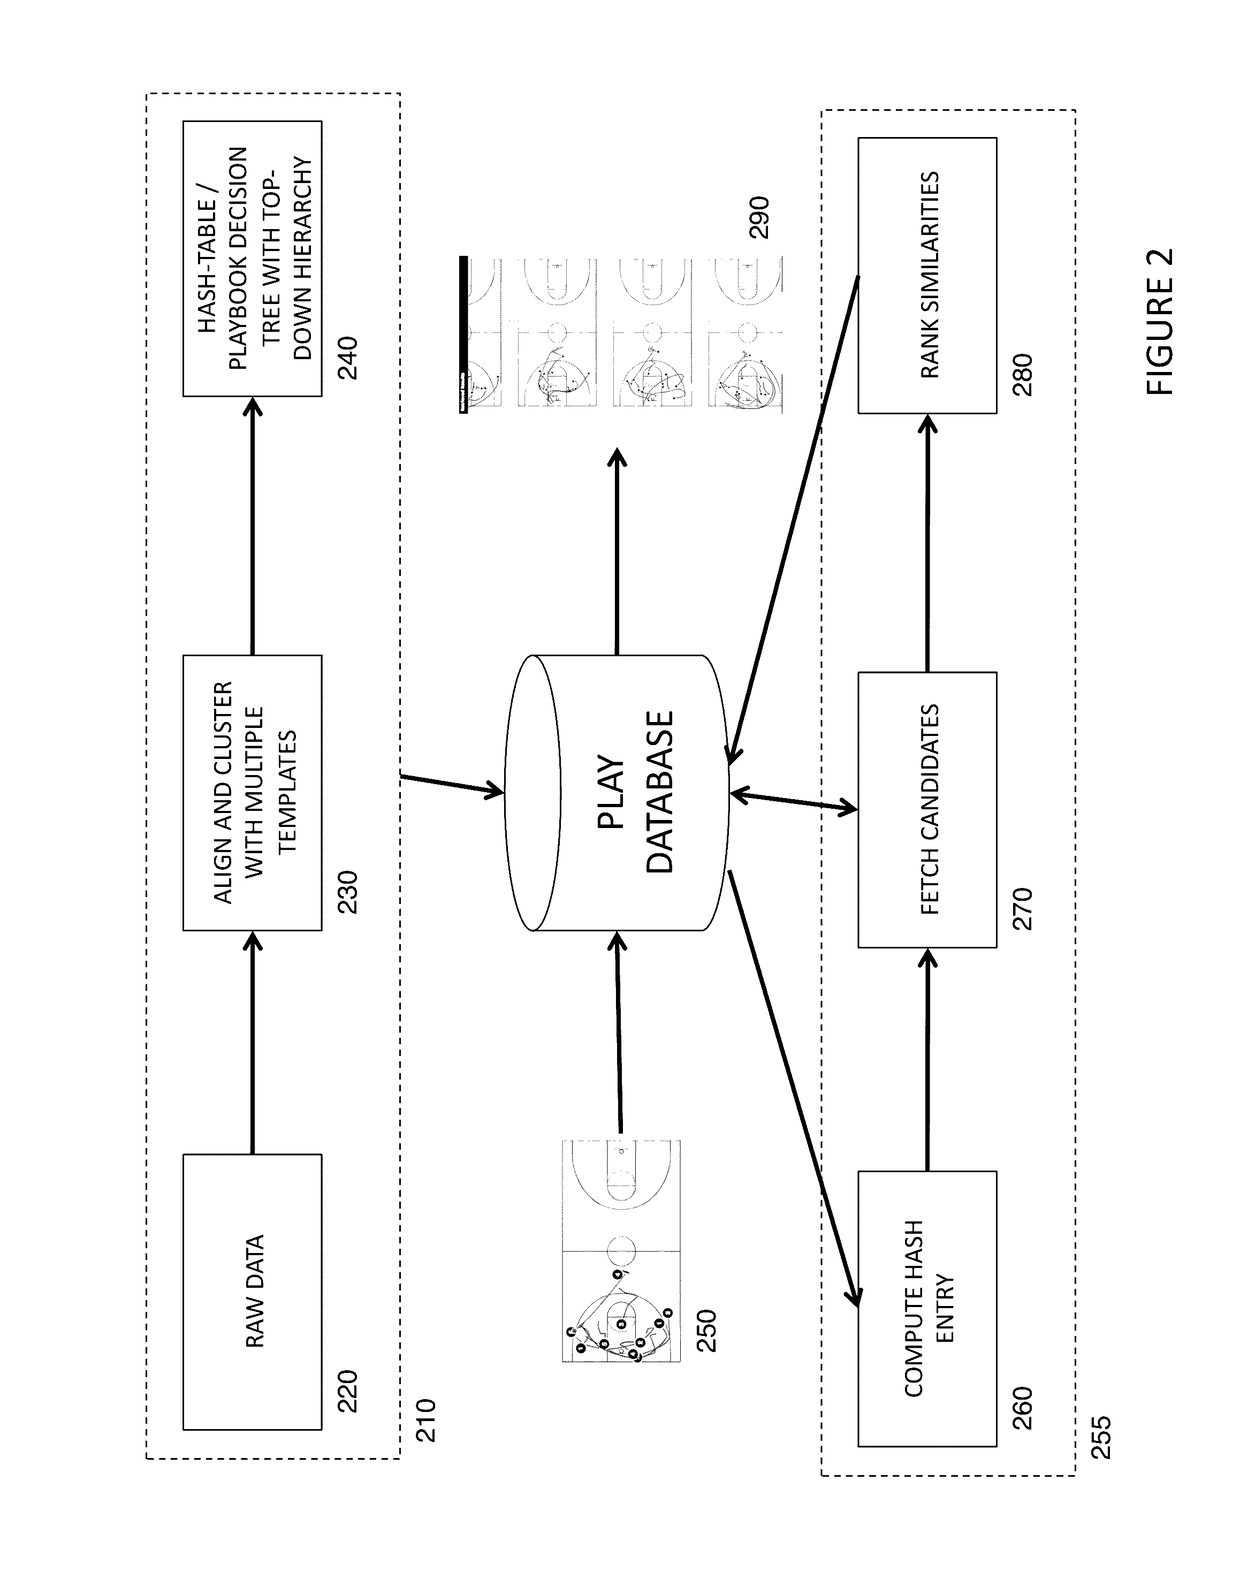 System for Interactive Sports Analytics Using Multi-Template Alignment and Discriminative Clustering